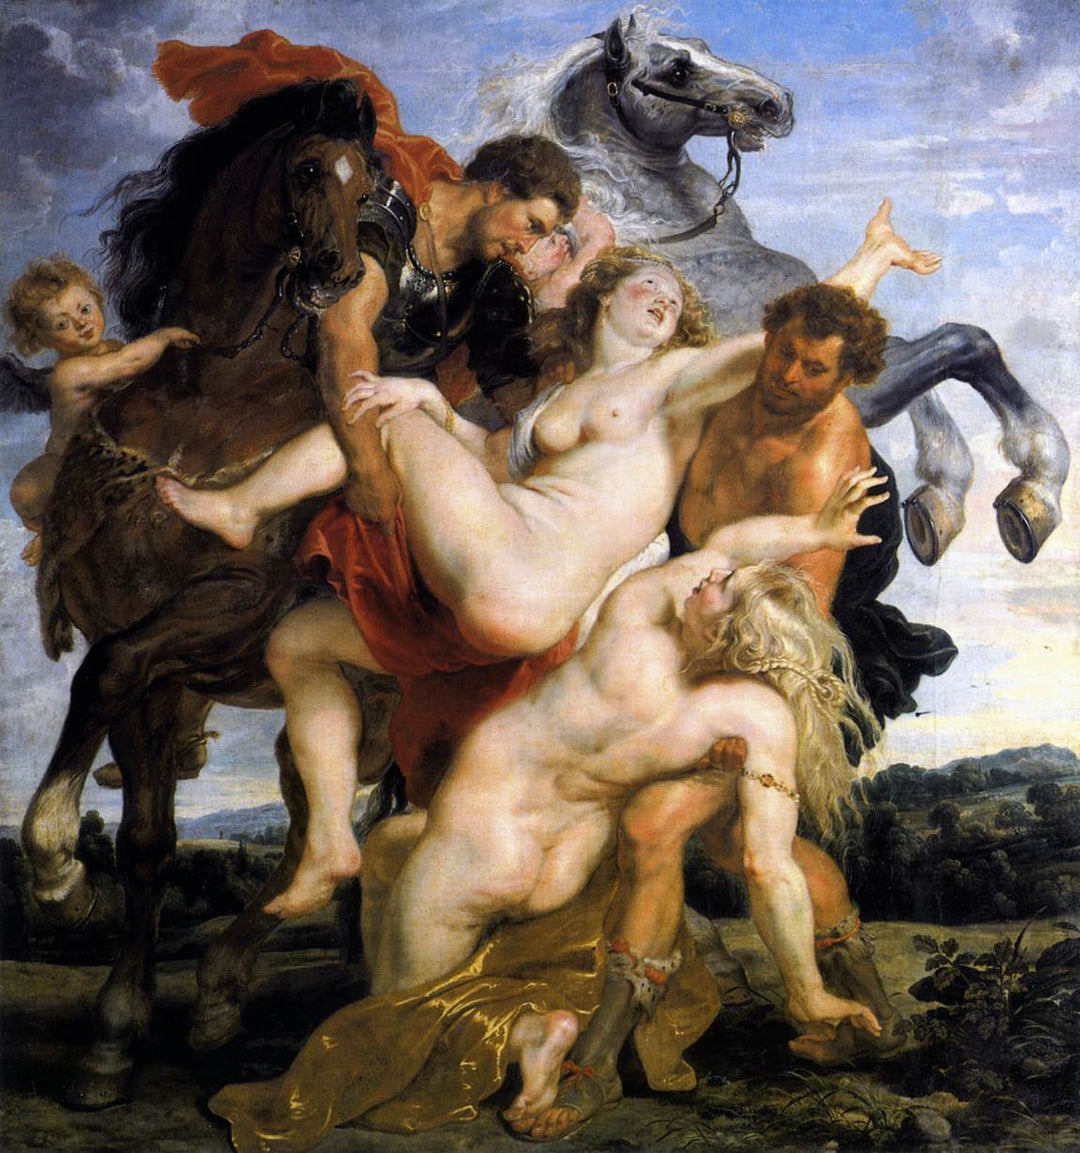 Rape of the Daughters of Leucippus by Peter Paul Rubens Reproduction Oil Painting on Canvas